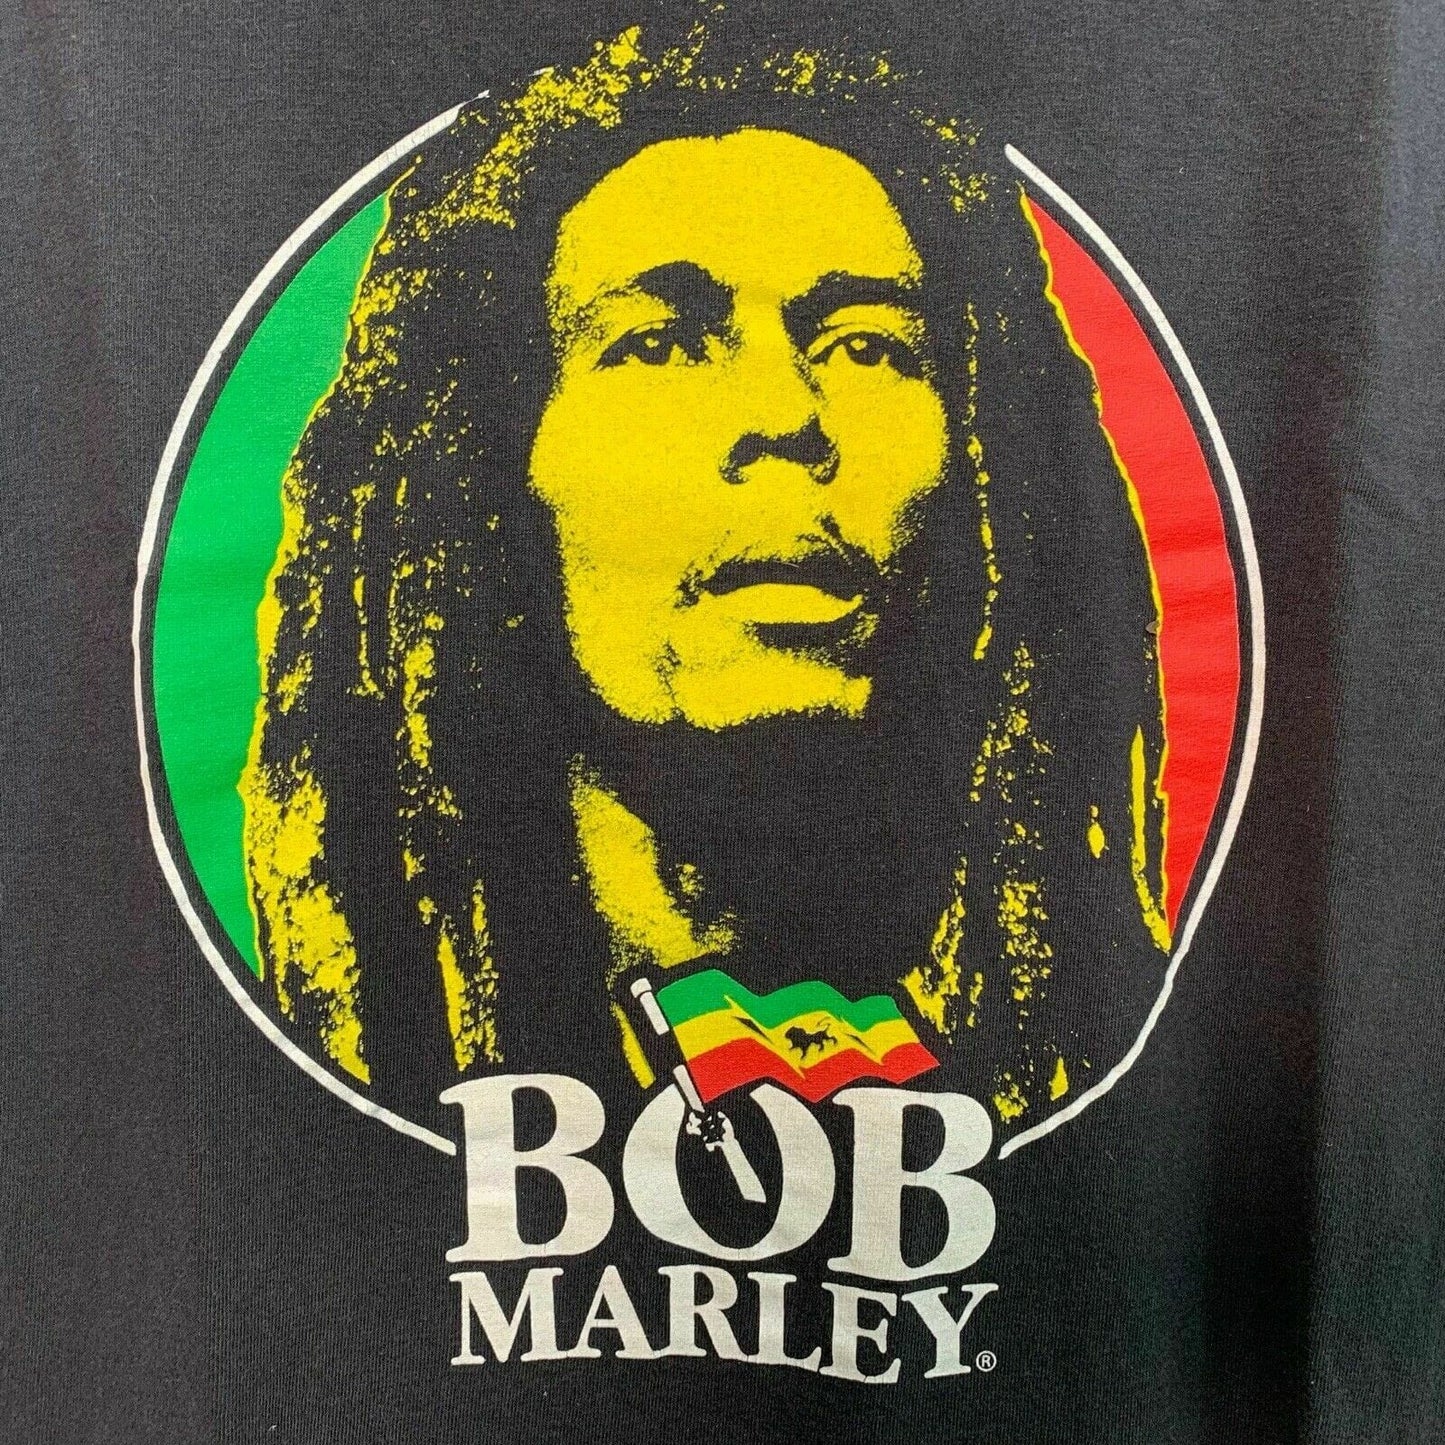 Rock the Iconic Style of Bob Marley with this Zion Rootswear Men's T-Shirt - Black, Size L